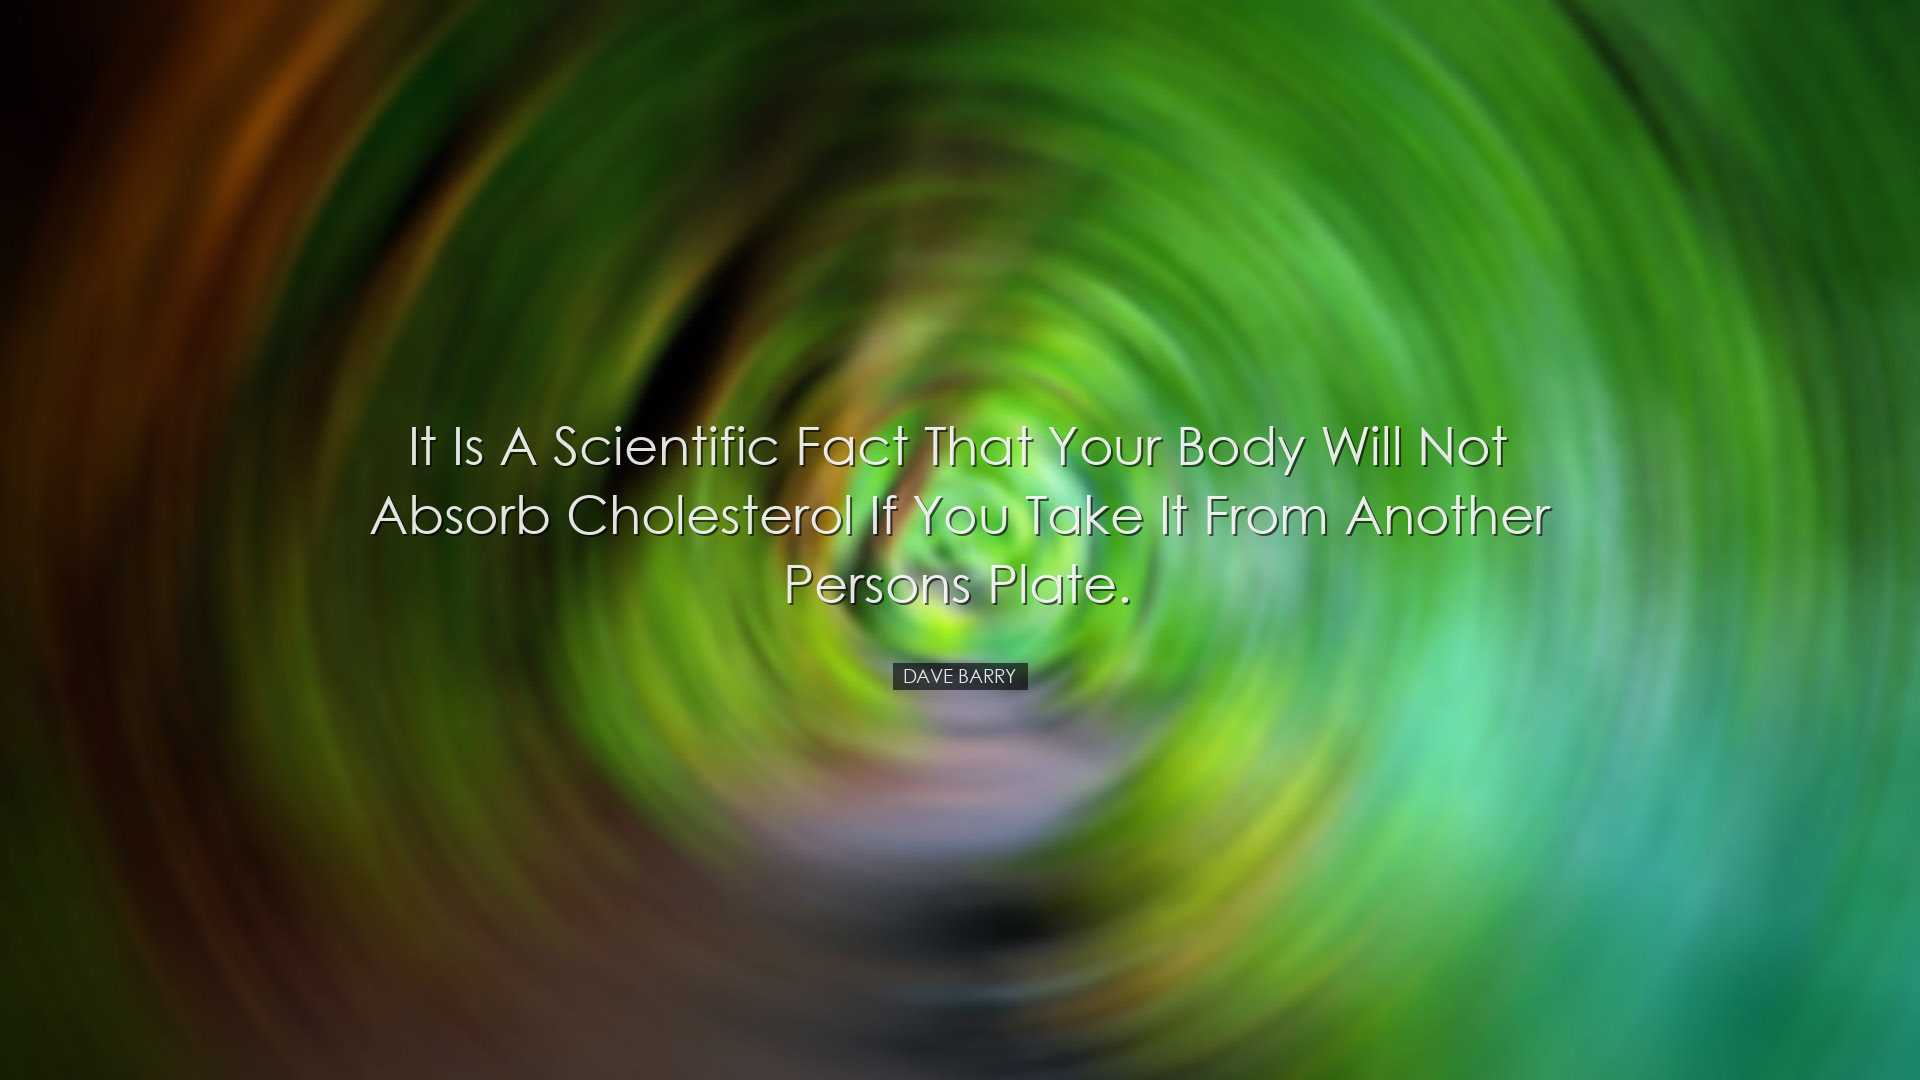 It is a scientific fact that your body will not absorb cholesterol